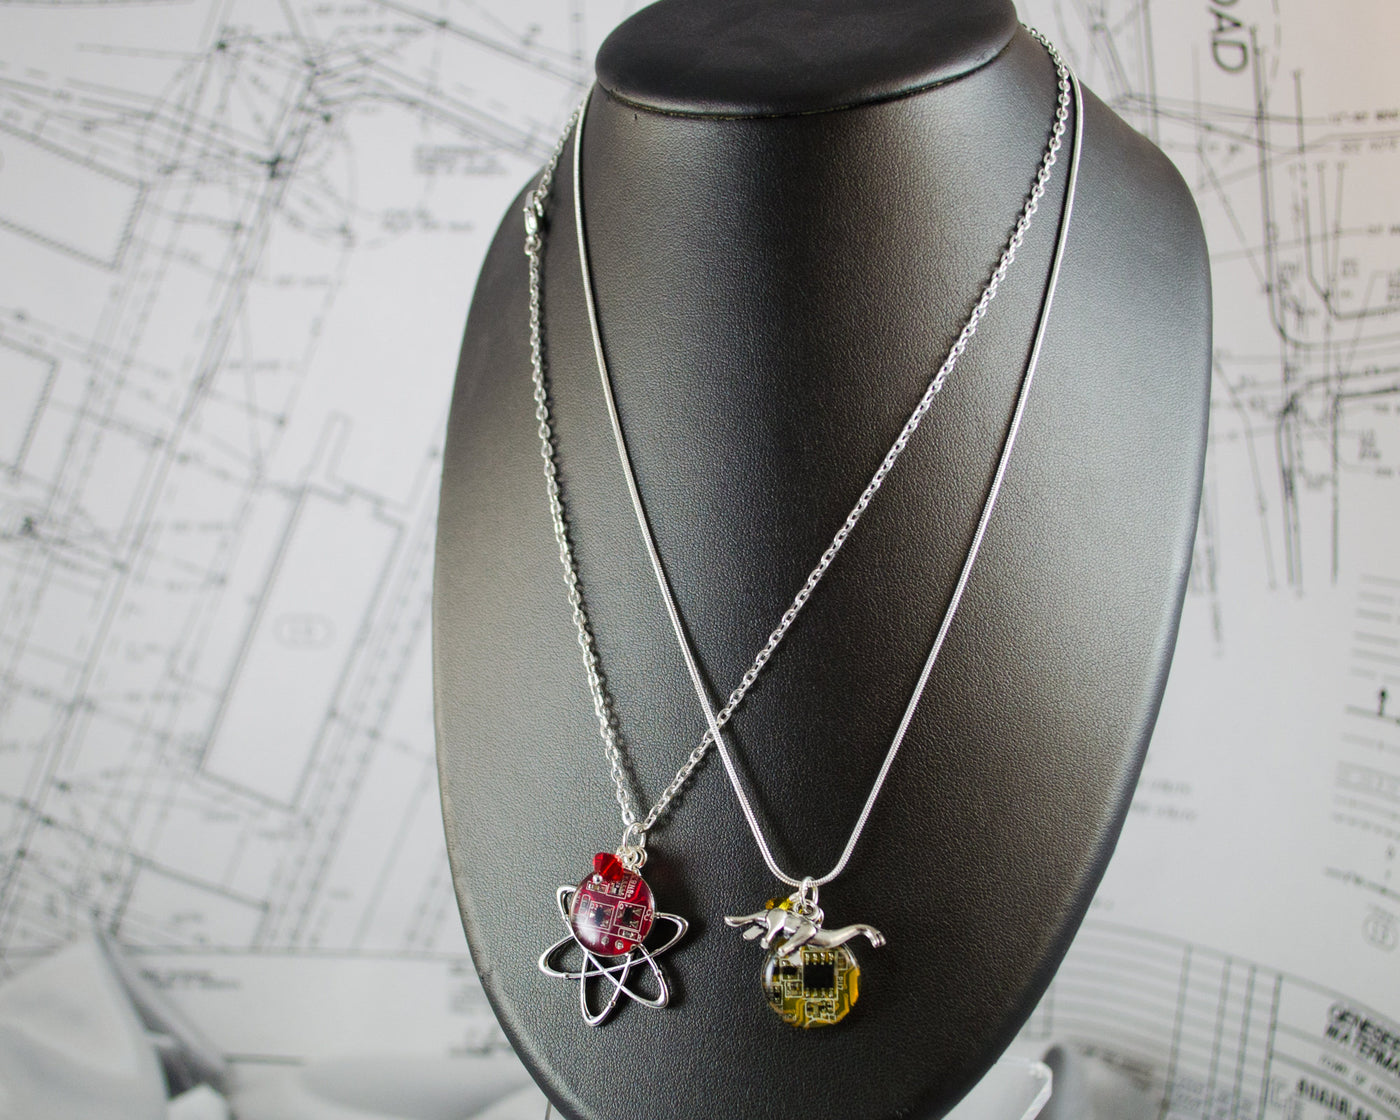 Circuit Board and NERD Charm Necklace